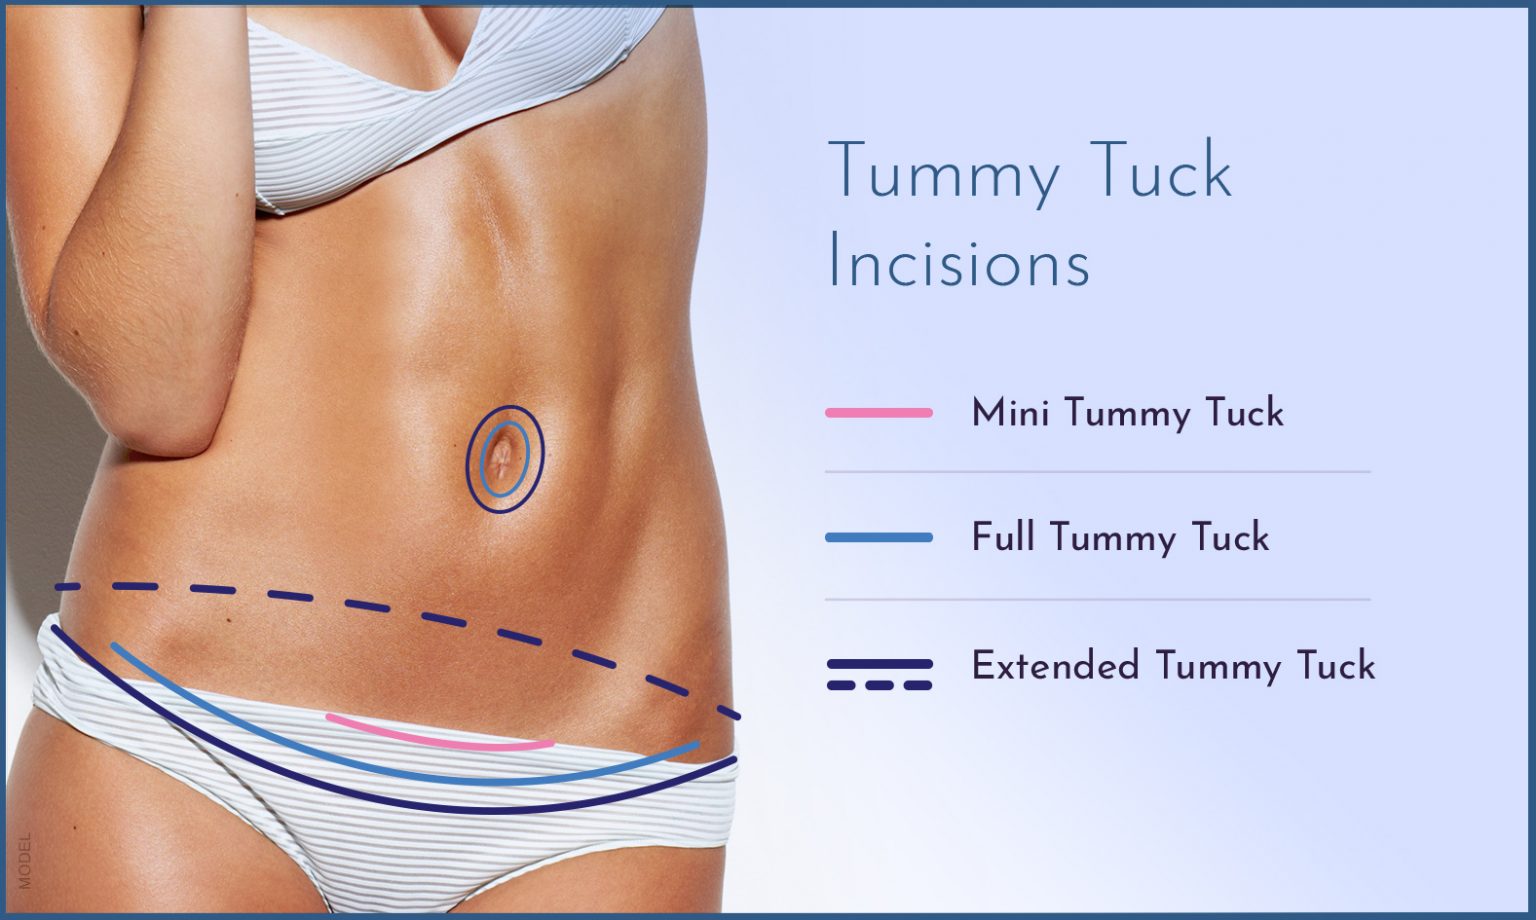 Medical Benefits of a Tummy Tuck Surgery